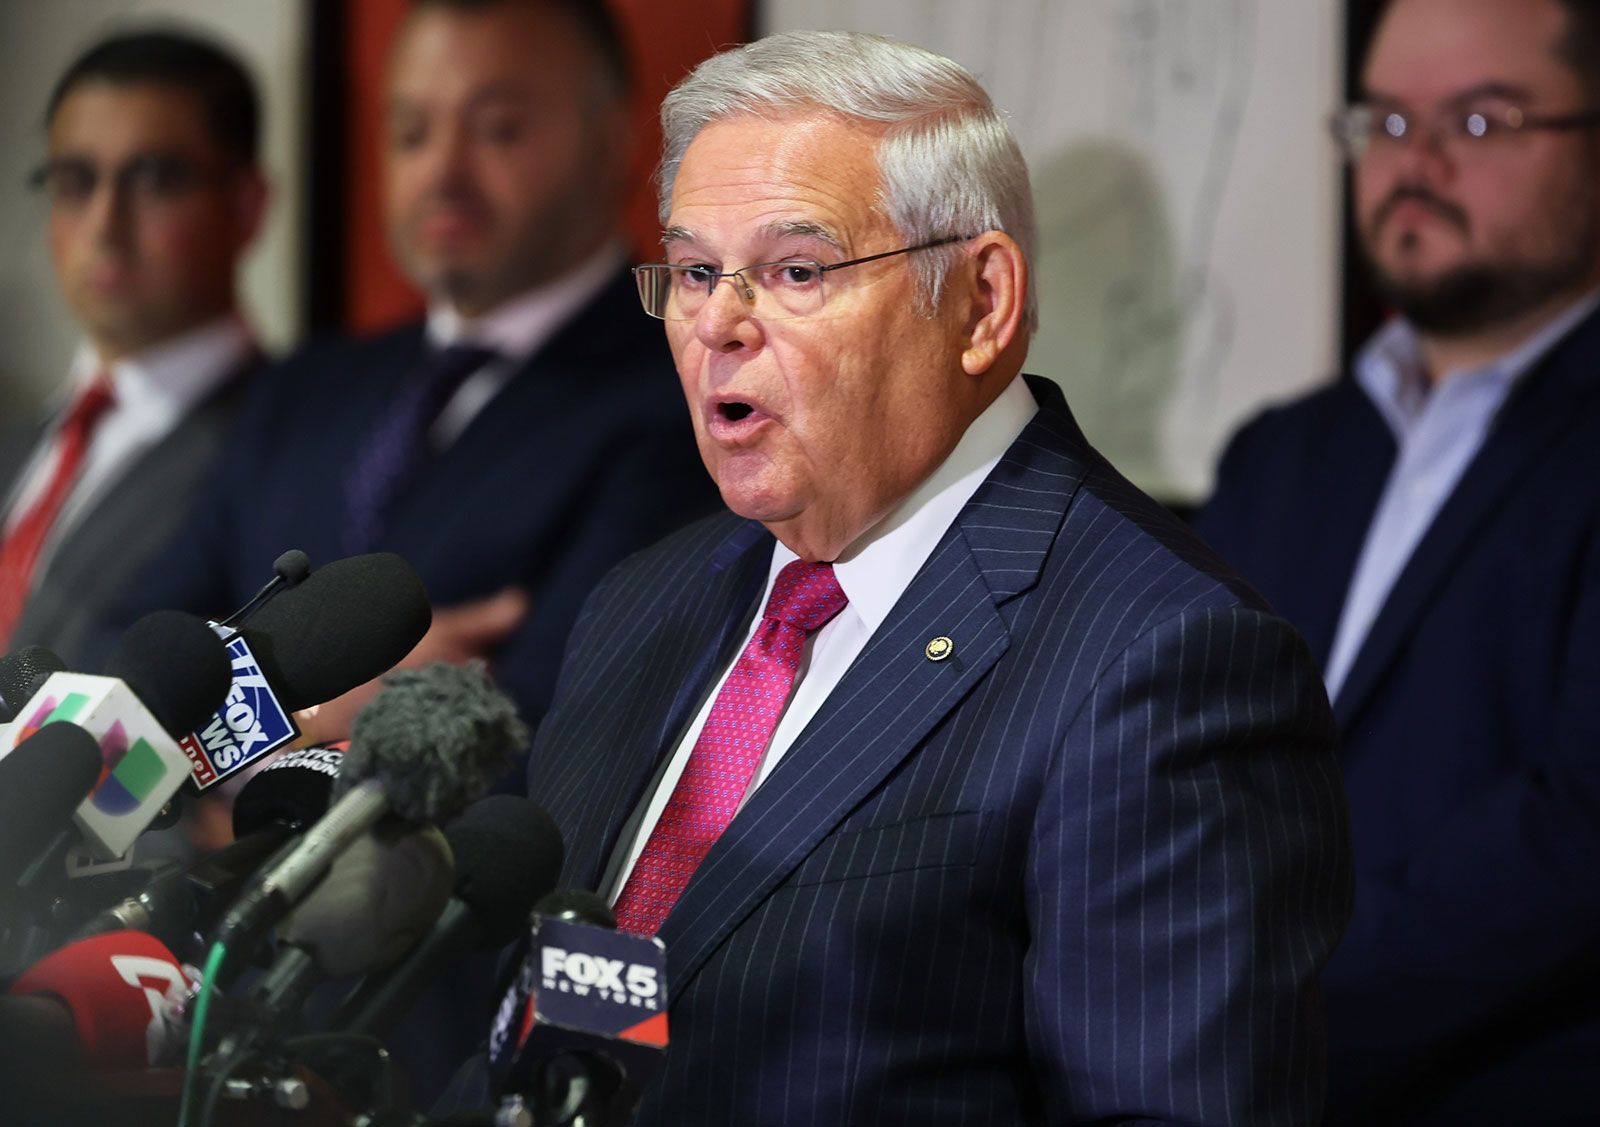 Sen. Bob Menendez charged with obstruction of justice in a bribery case